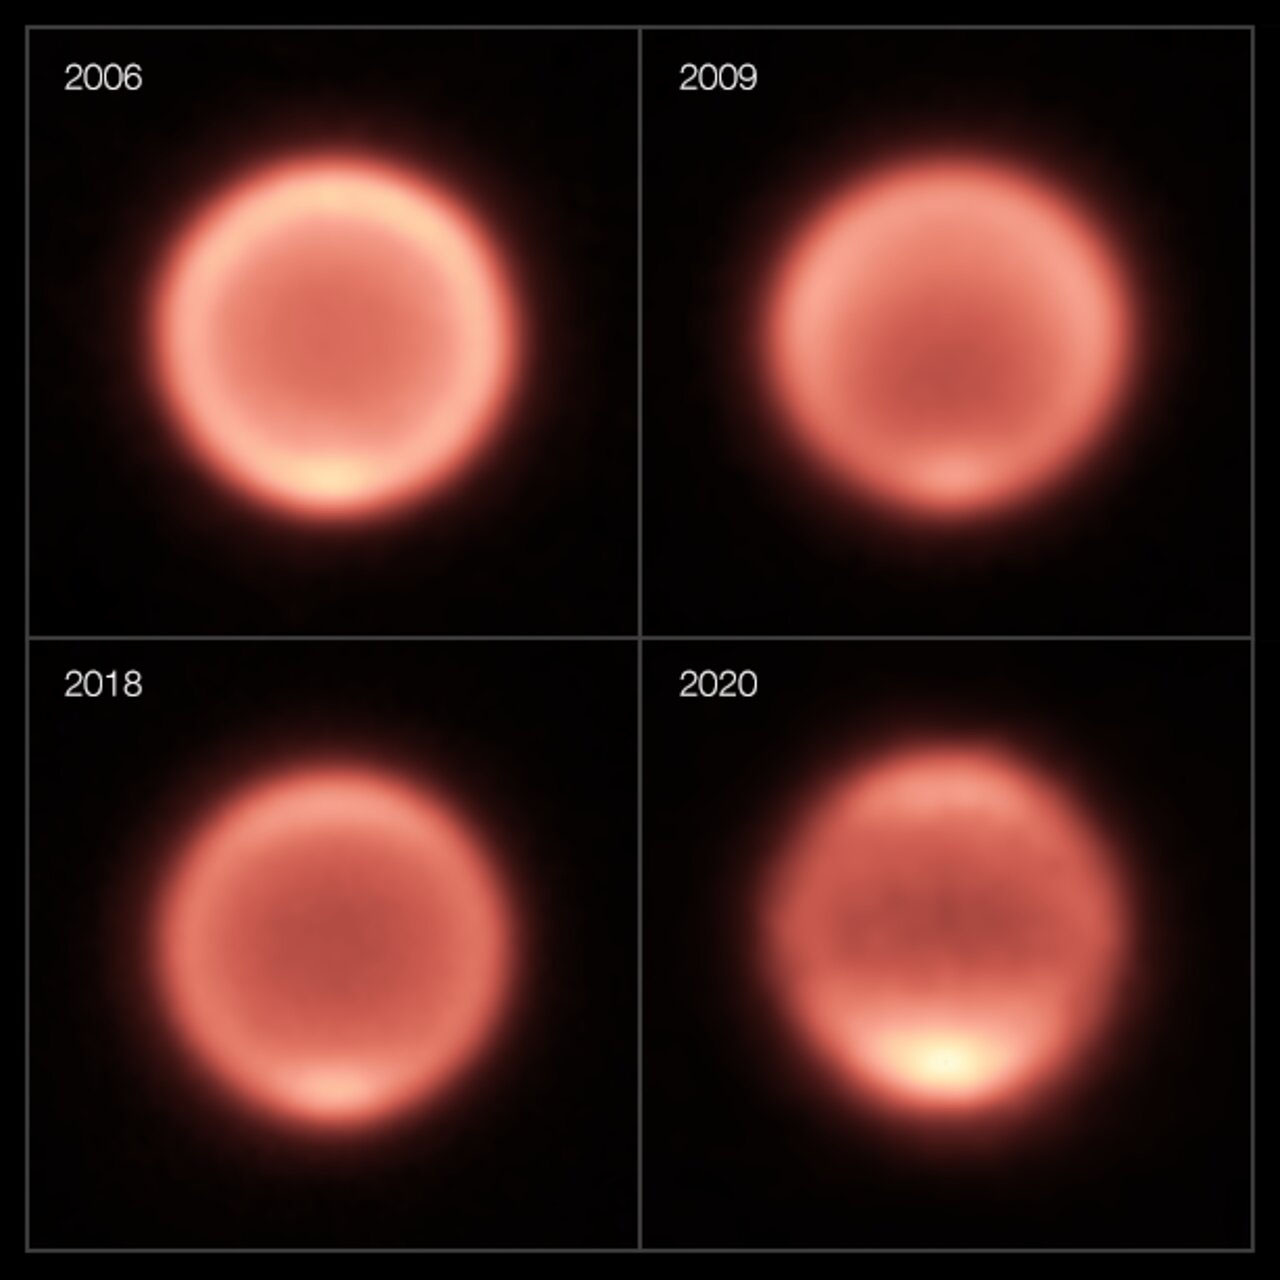 This composite shows thermal images of Neptune taken between 2006 and 2020